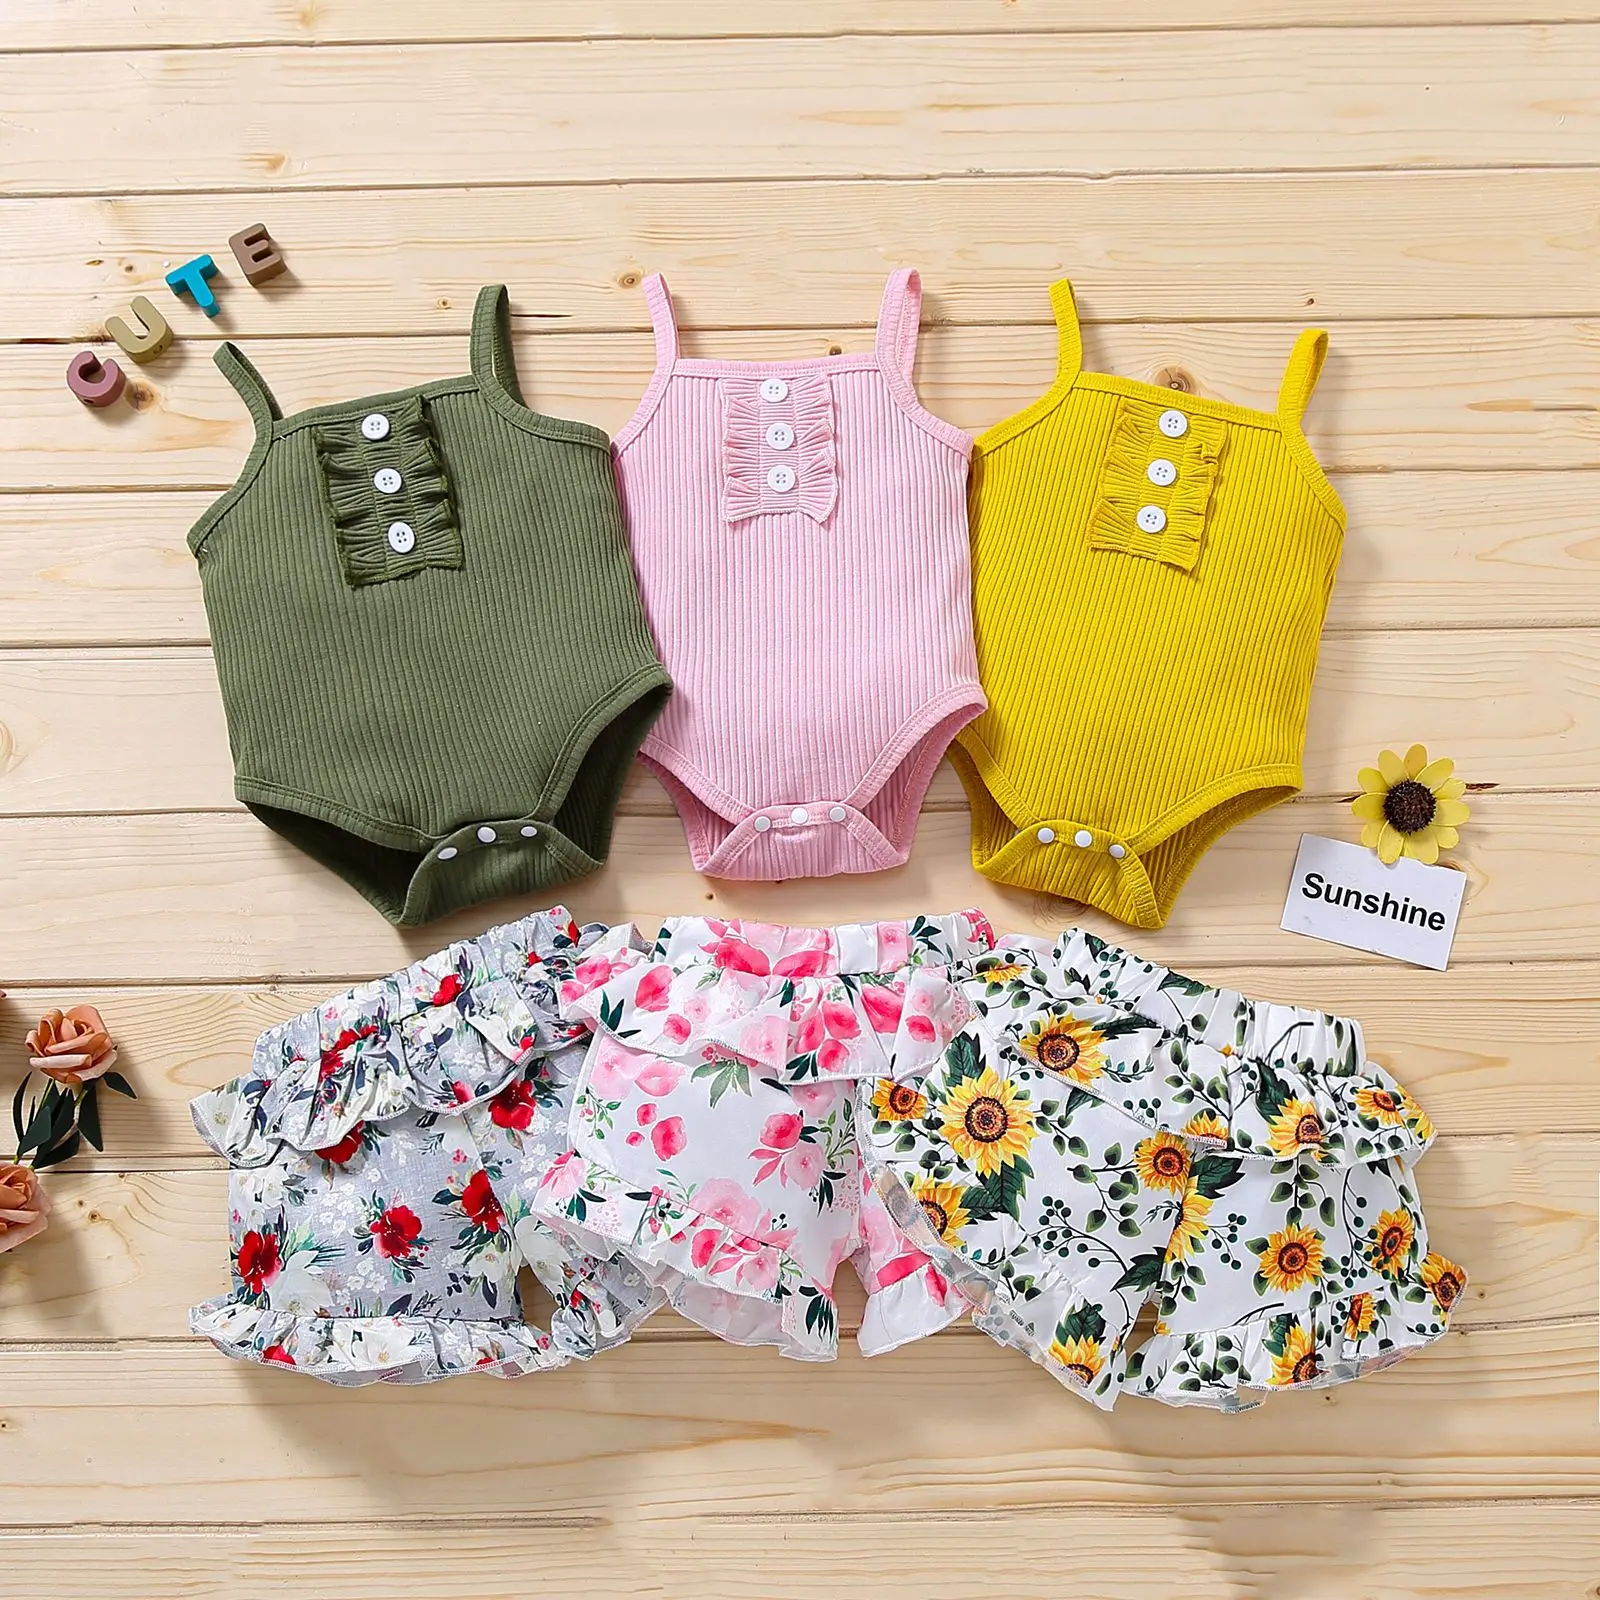 

Summer Infant Toddler Ribbed Cotton Singlet Romper Floral Ruffled Shorts Outfits Baby Girls Clothing Sets Clothes, Photo showed and customized color